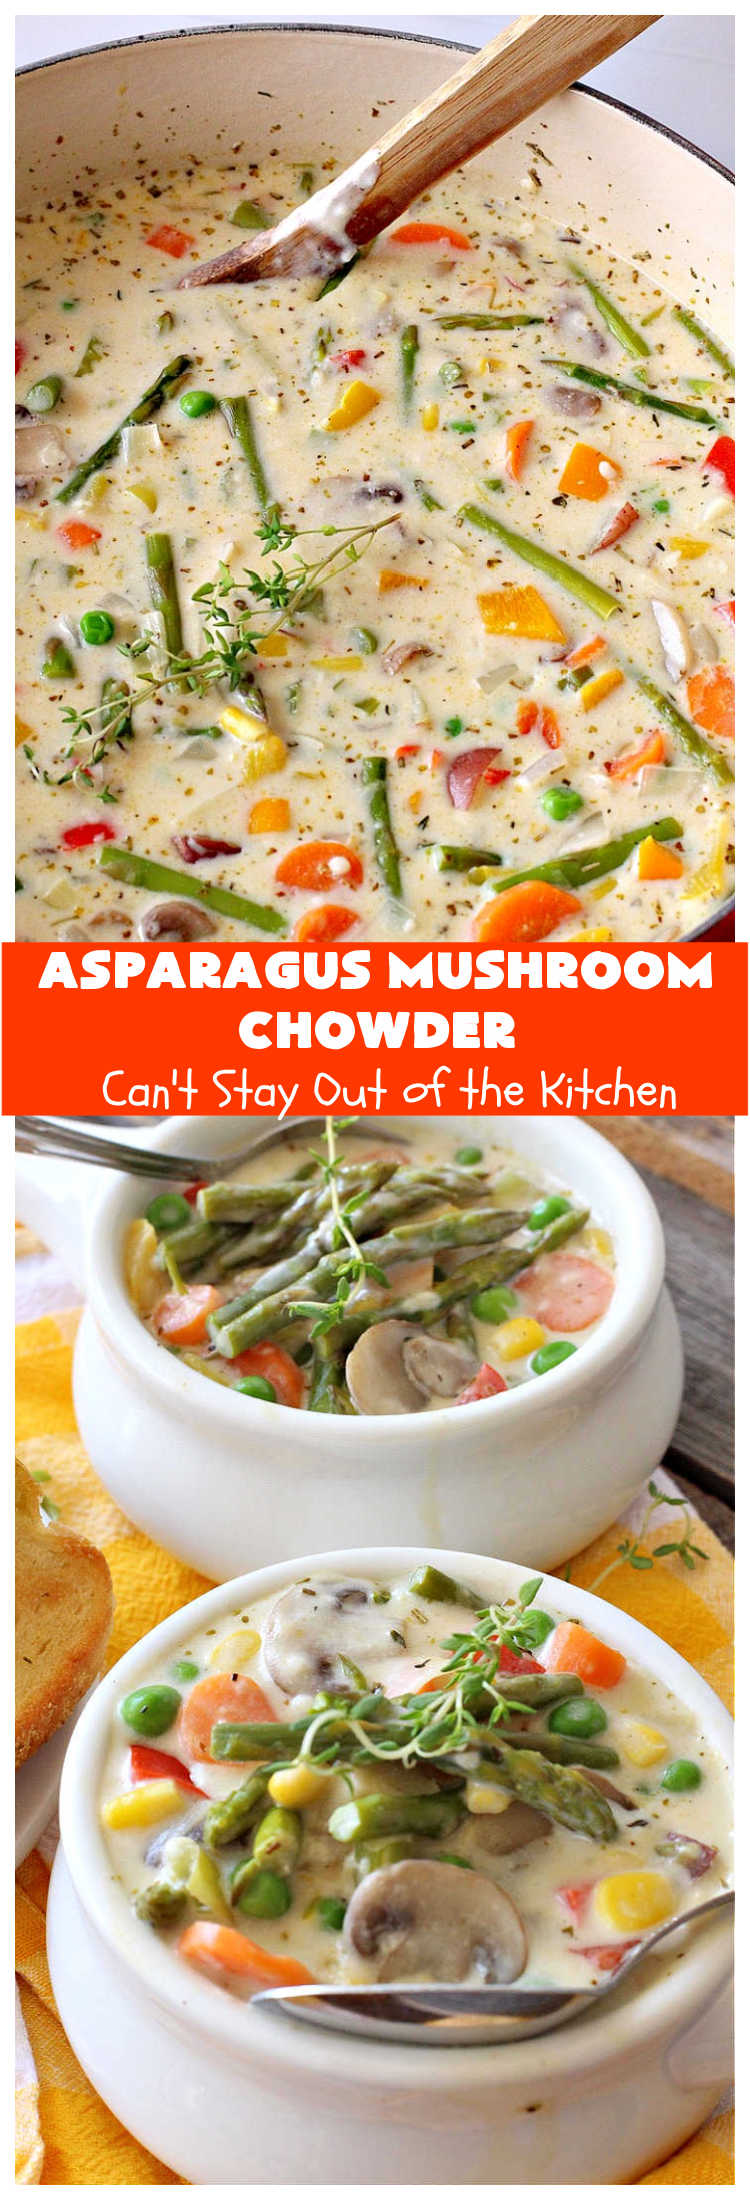 Asparagus Mushroom Chowder | Can't Stay Out of the Kitchen | this spectacular #chowder can be whipped up in 30 minutes. It's perfect for weeknight dinners. While this is a comfort food #recipe it's chocked full of #healthy veggies. Mouthwatering & irresistible! #soup #asparagus #mushrooms #potatoes #carrots #corn #GlutenFree #AsparagusMushroomChowder